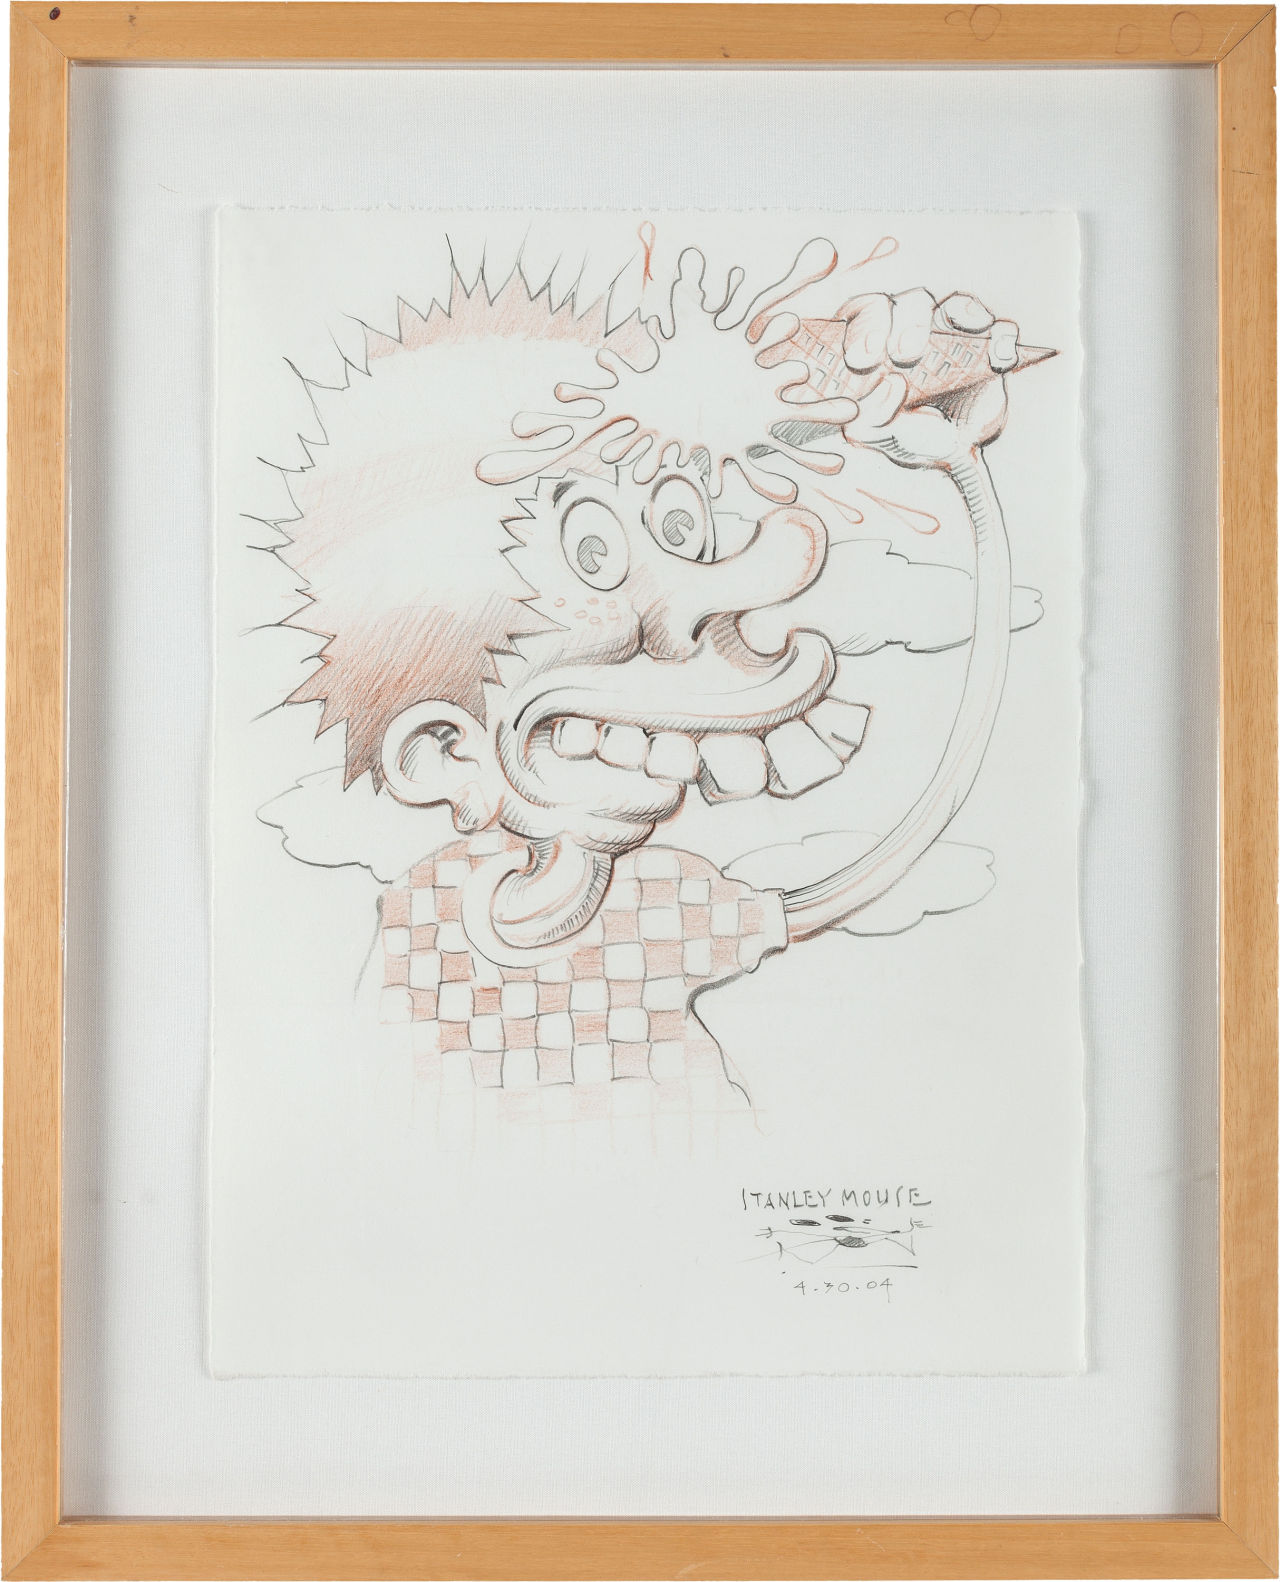 Lot 89384: Stanley Mouse’s original drawing of “Ice Cream Kid” from the cover of the Grateful Dead album Europe ‘72